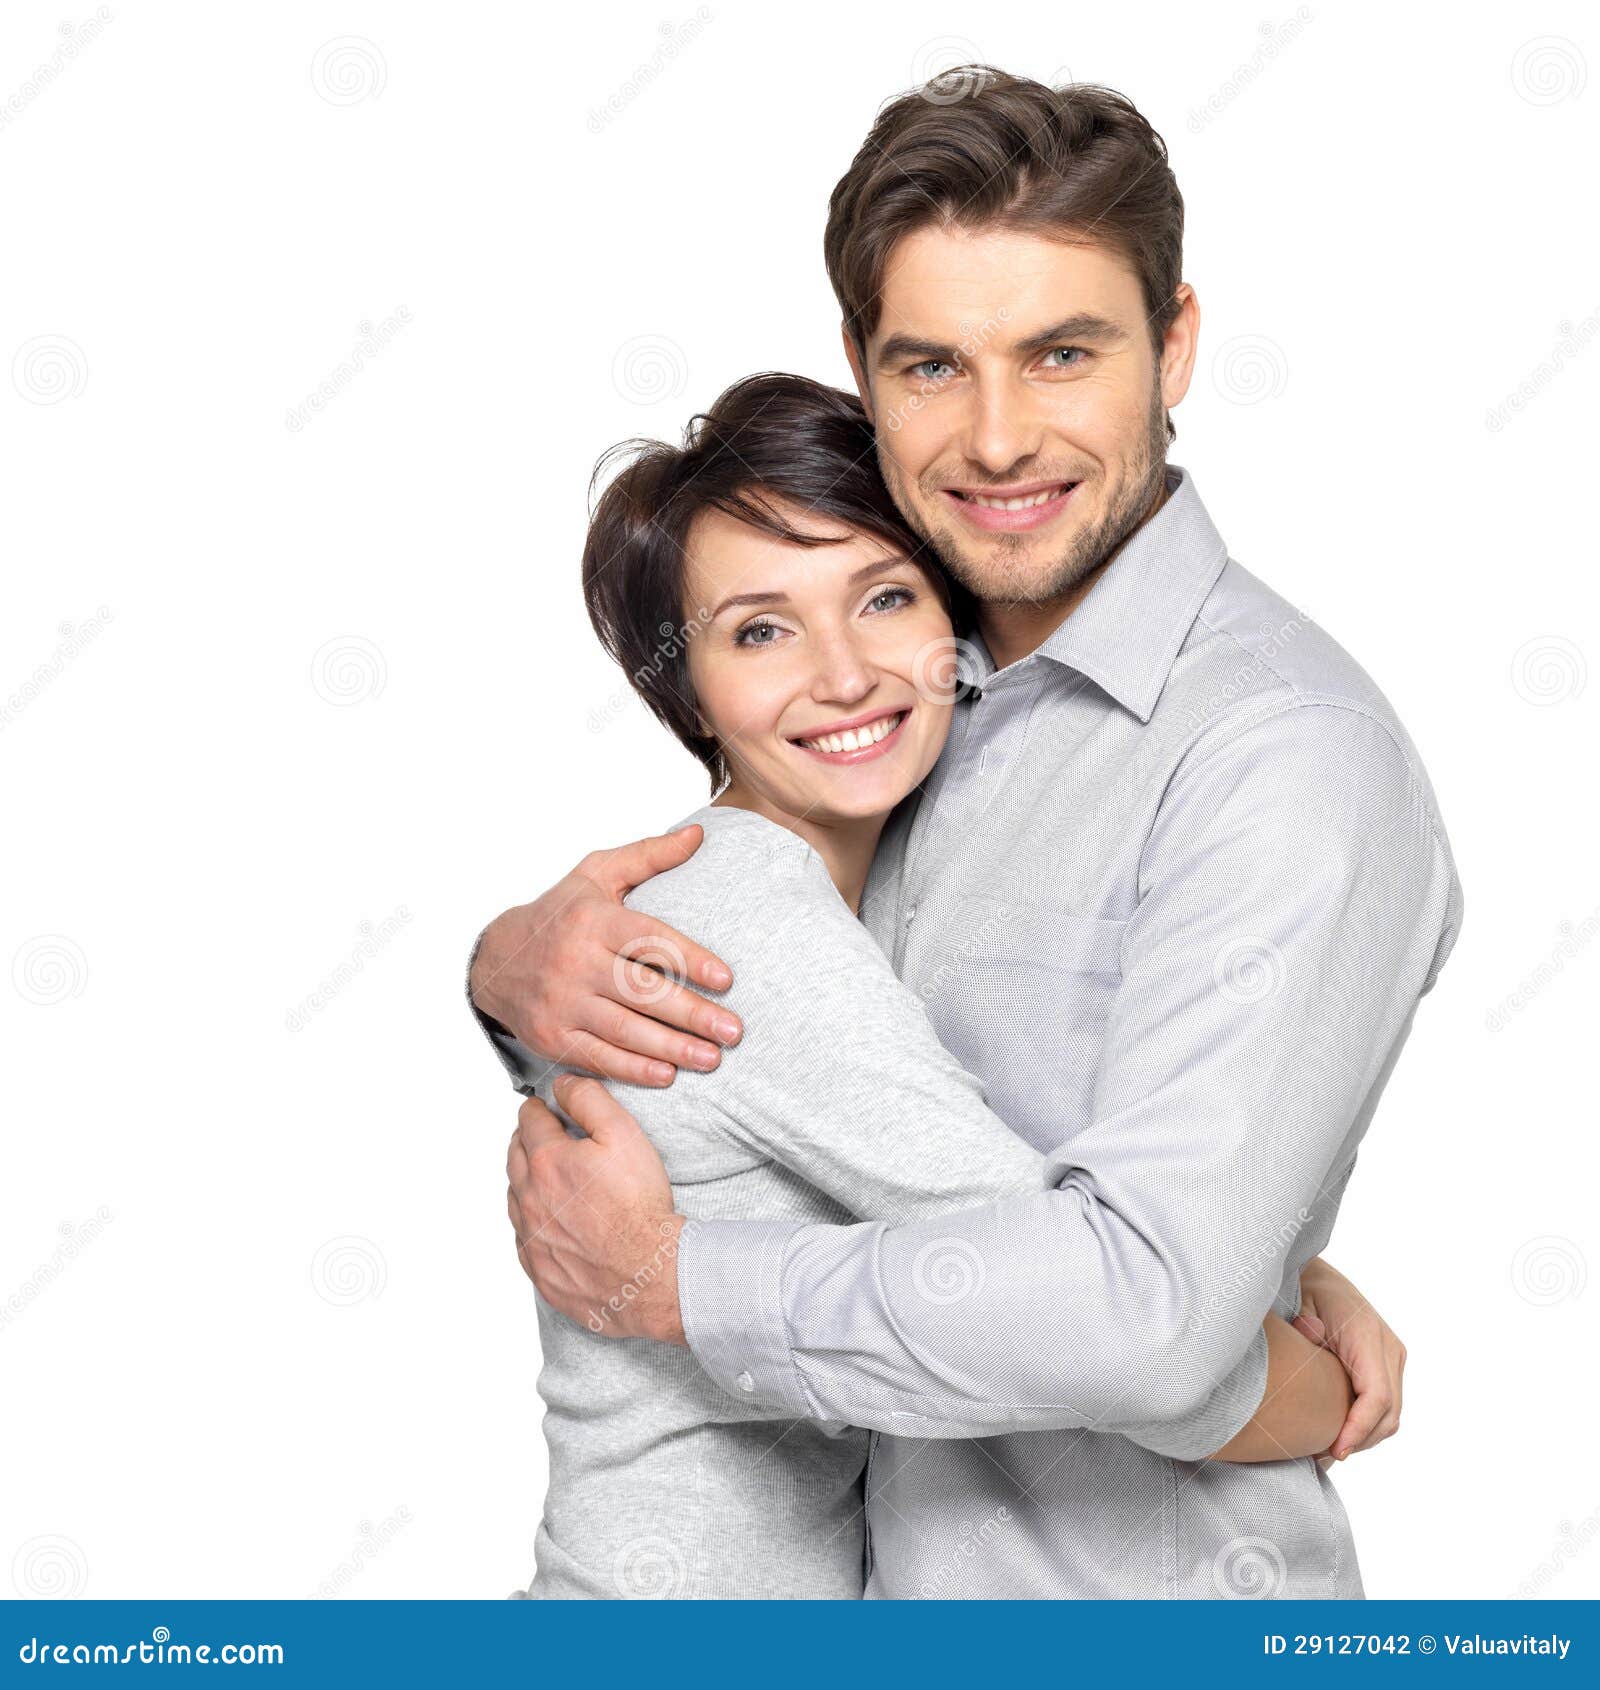 https://thumbs.dreamstime.com/z/portrait-happy-couple-isolated-white-29127042.jpg